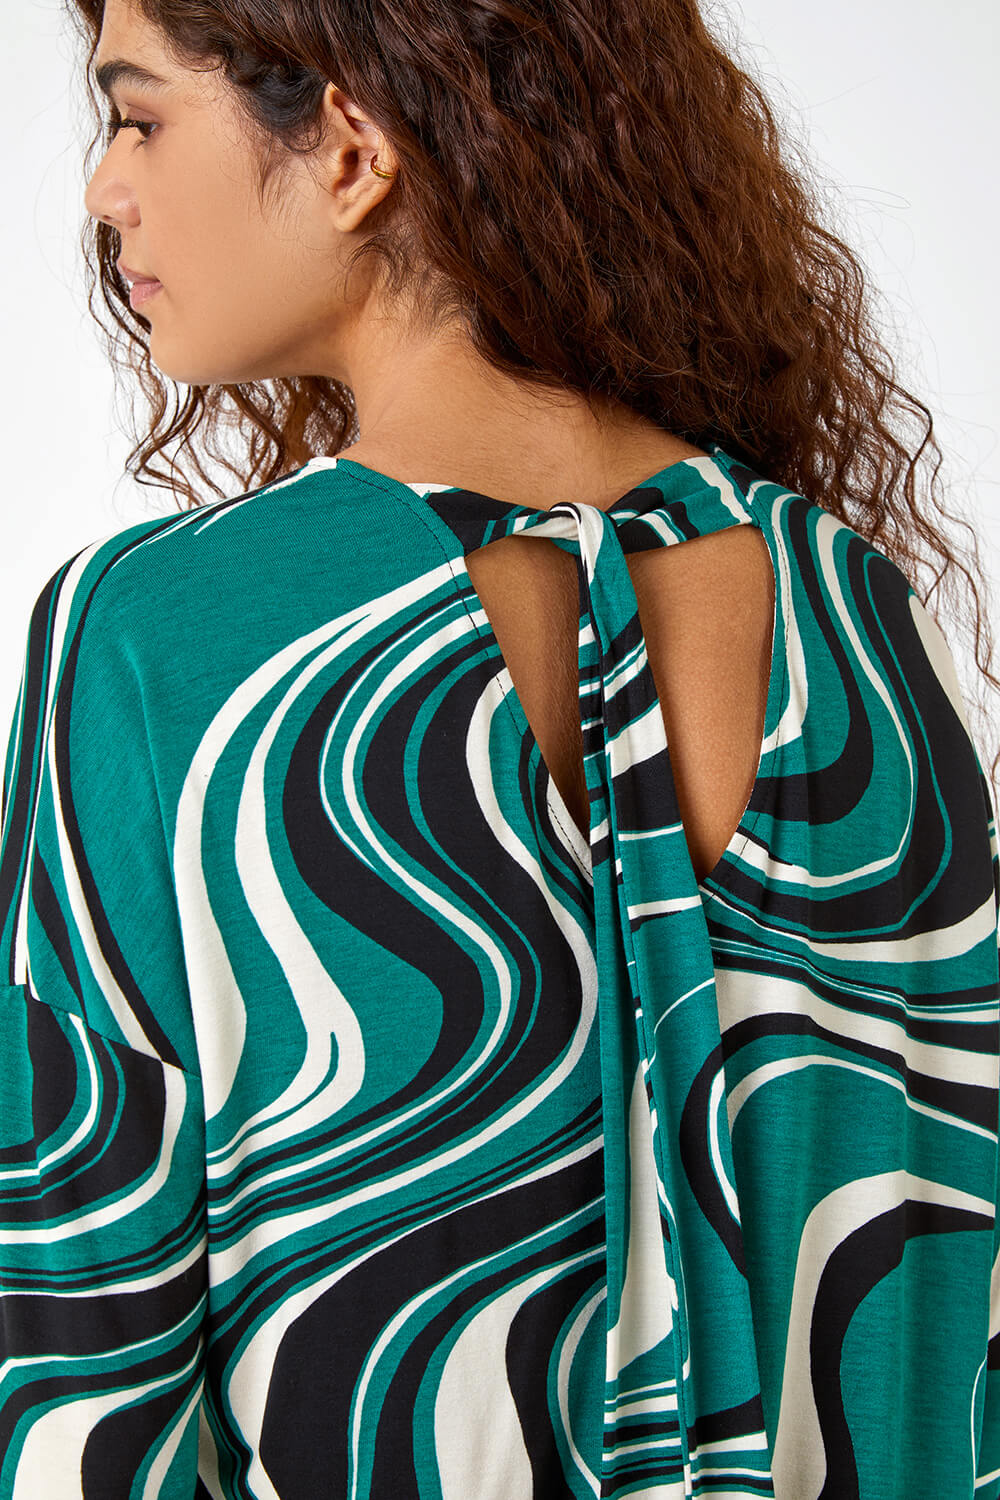 Green Swirl Print Tie Back Stretch Top, Image 2 of 5